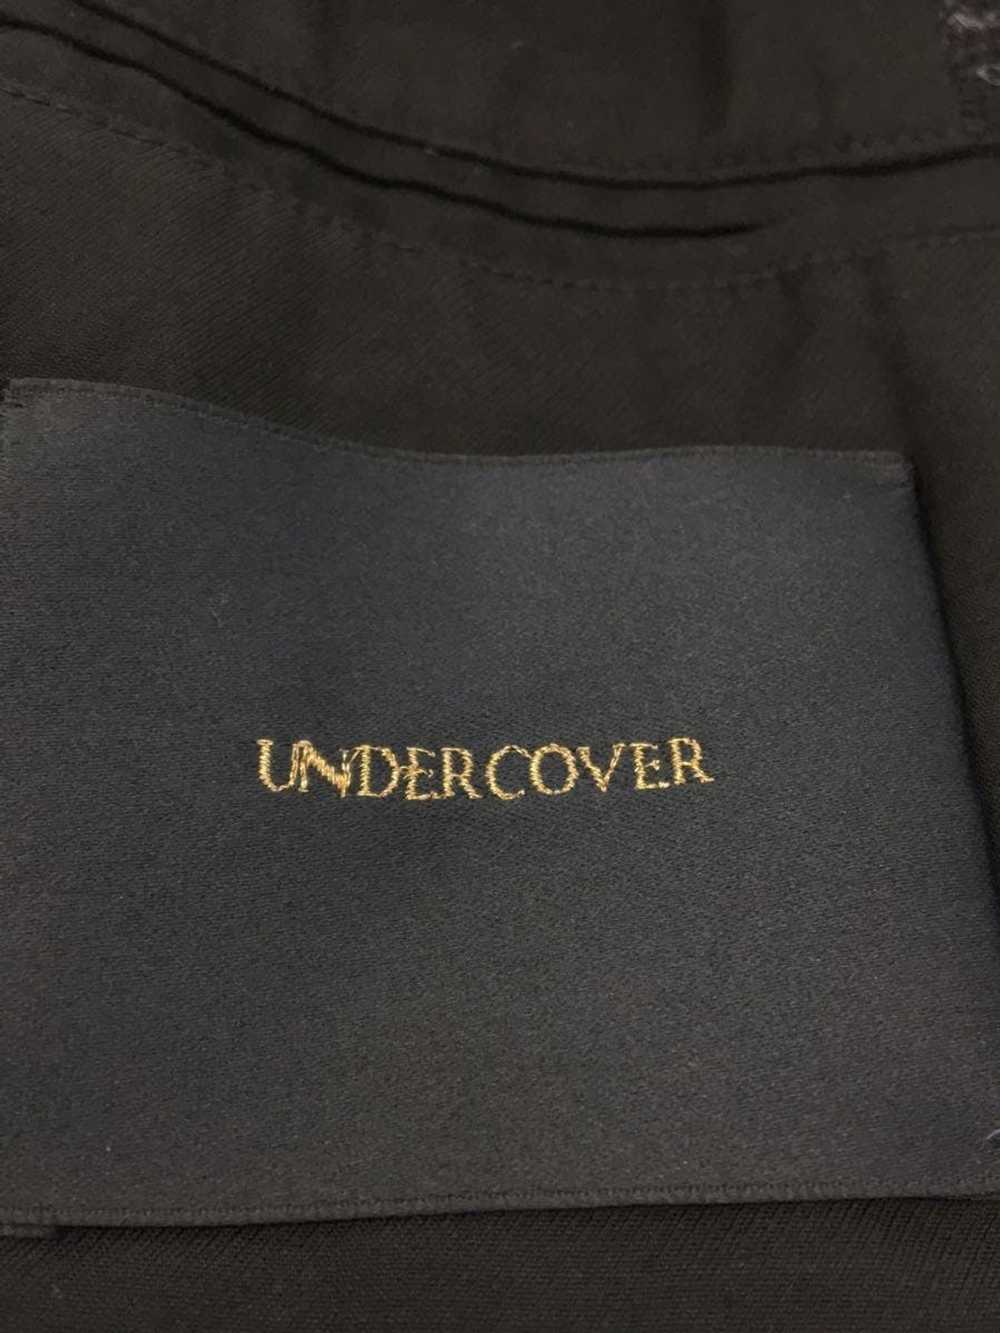 Undercover Light Jackets Navy Tailored Wool Plain - image 3